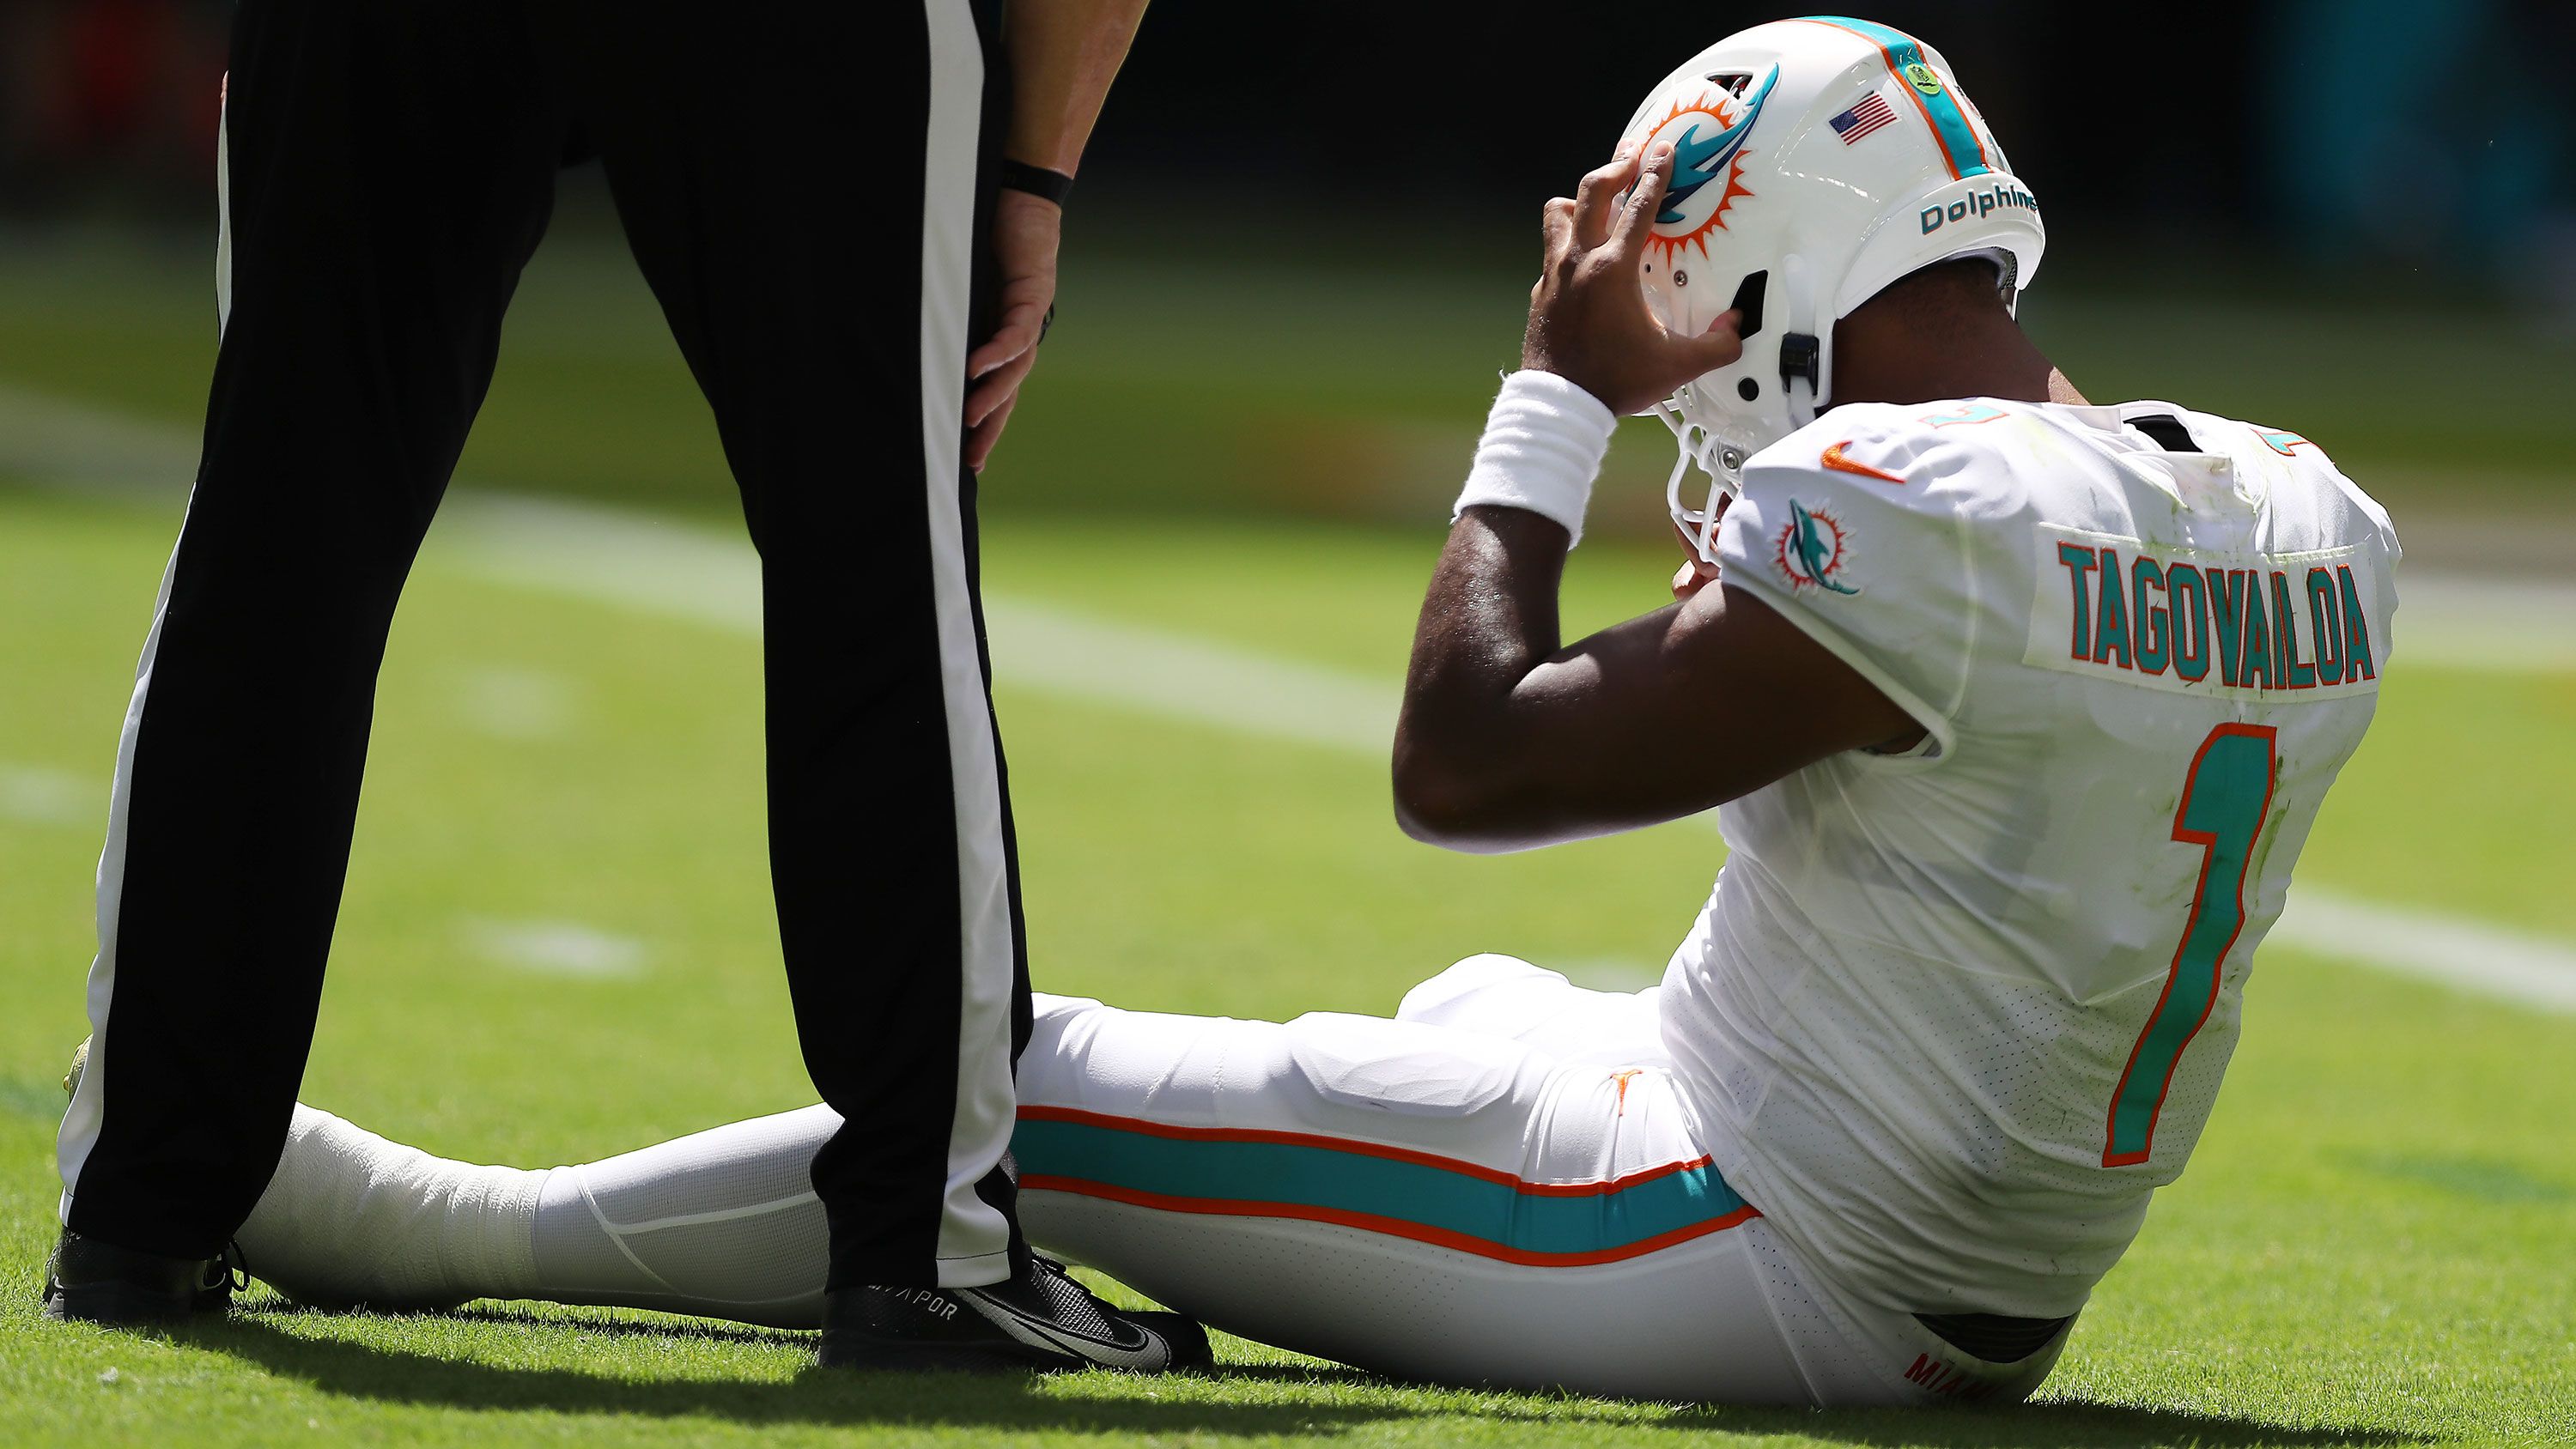 NFL concussion protocol: What are the steps for return to play?